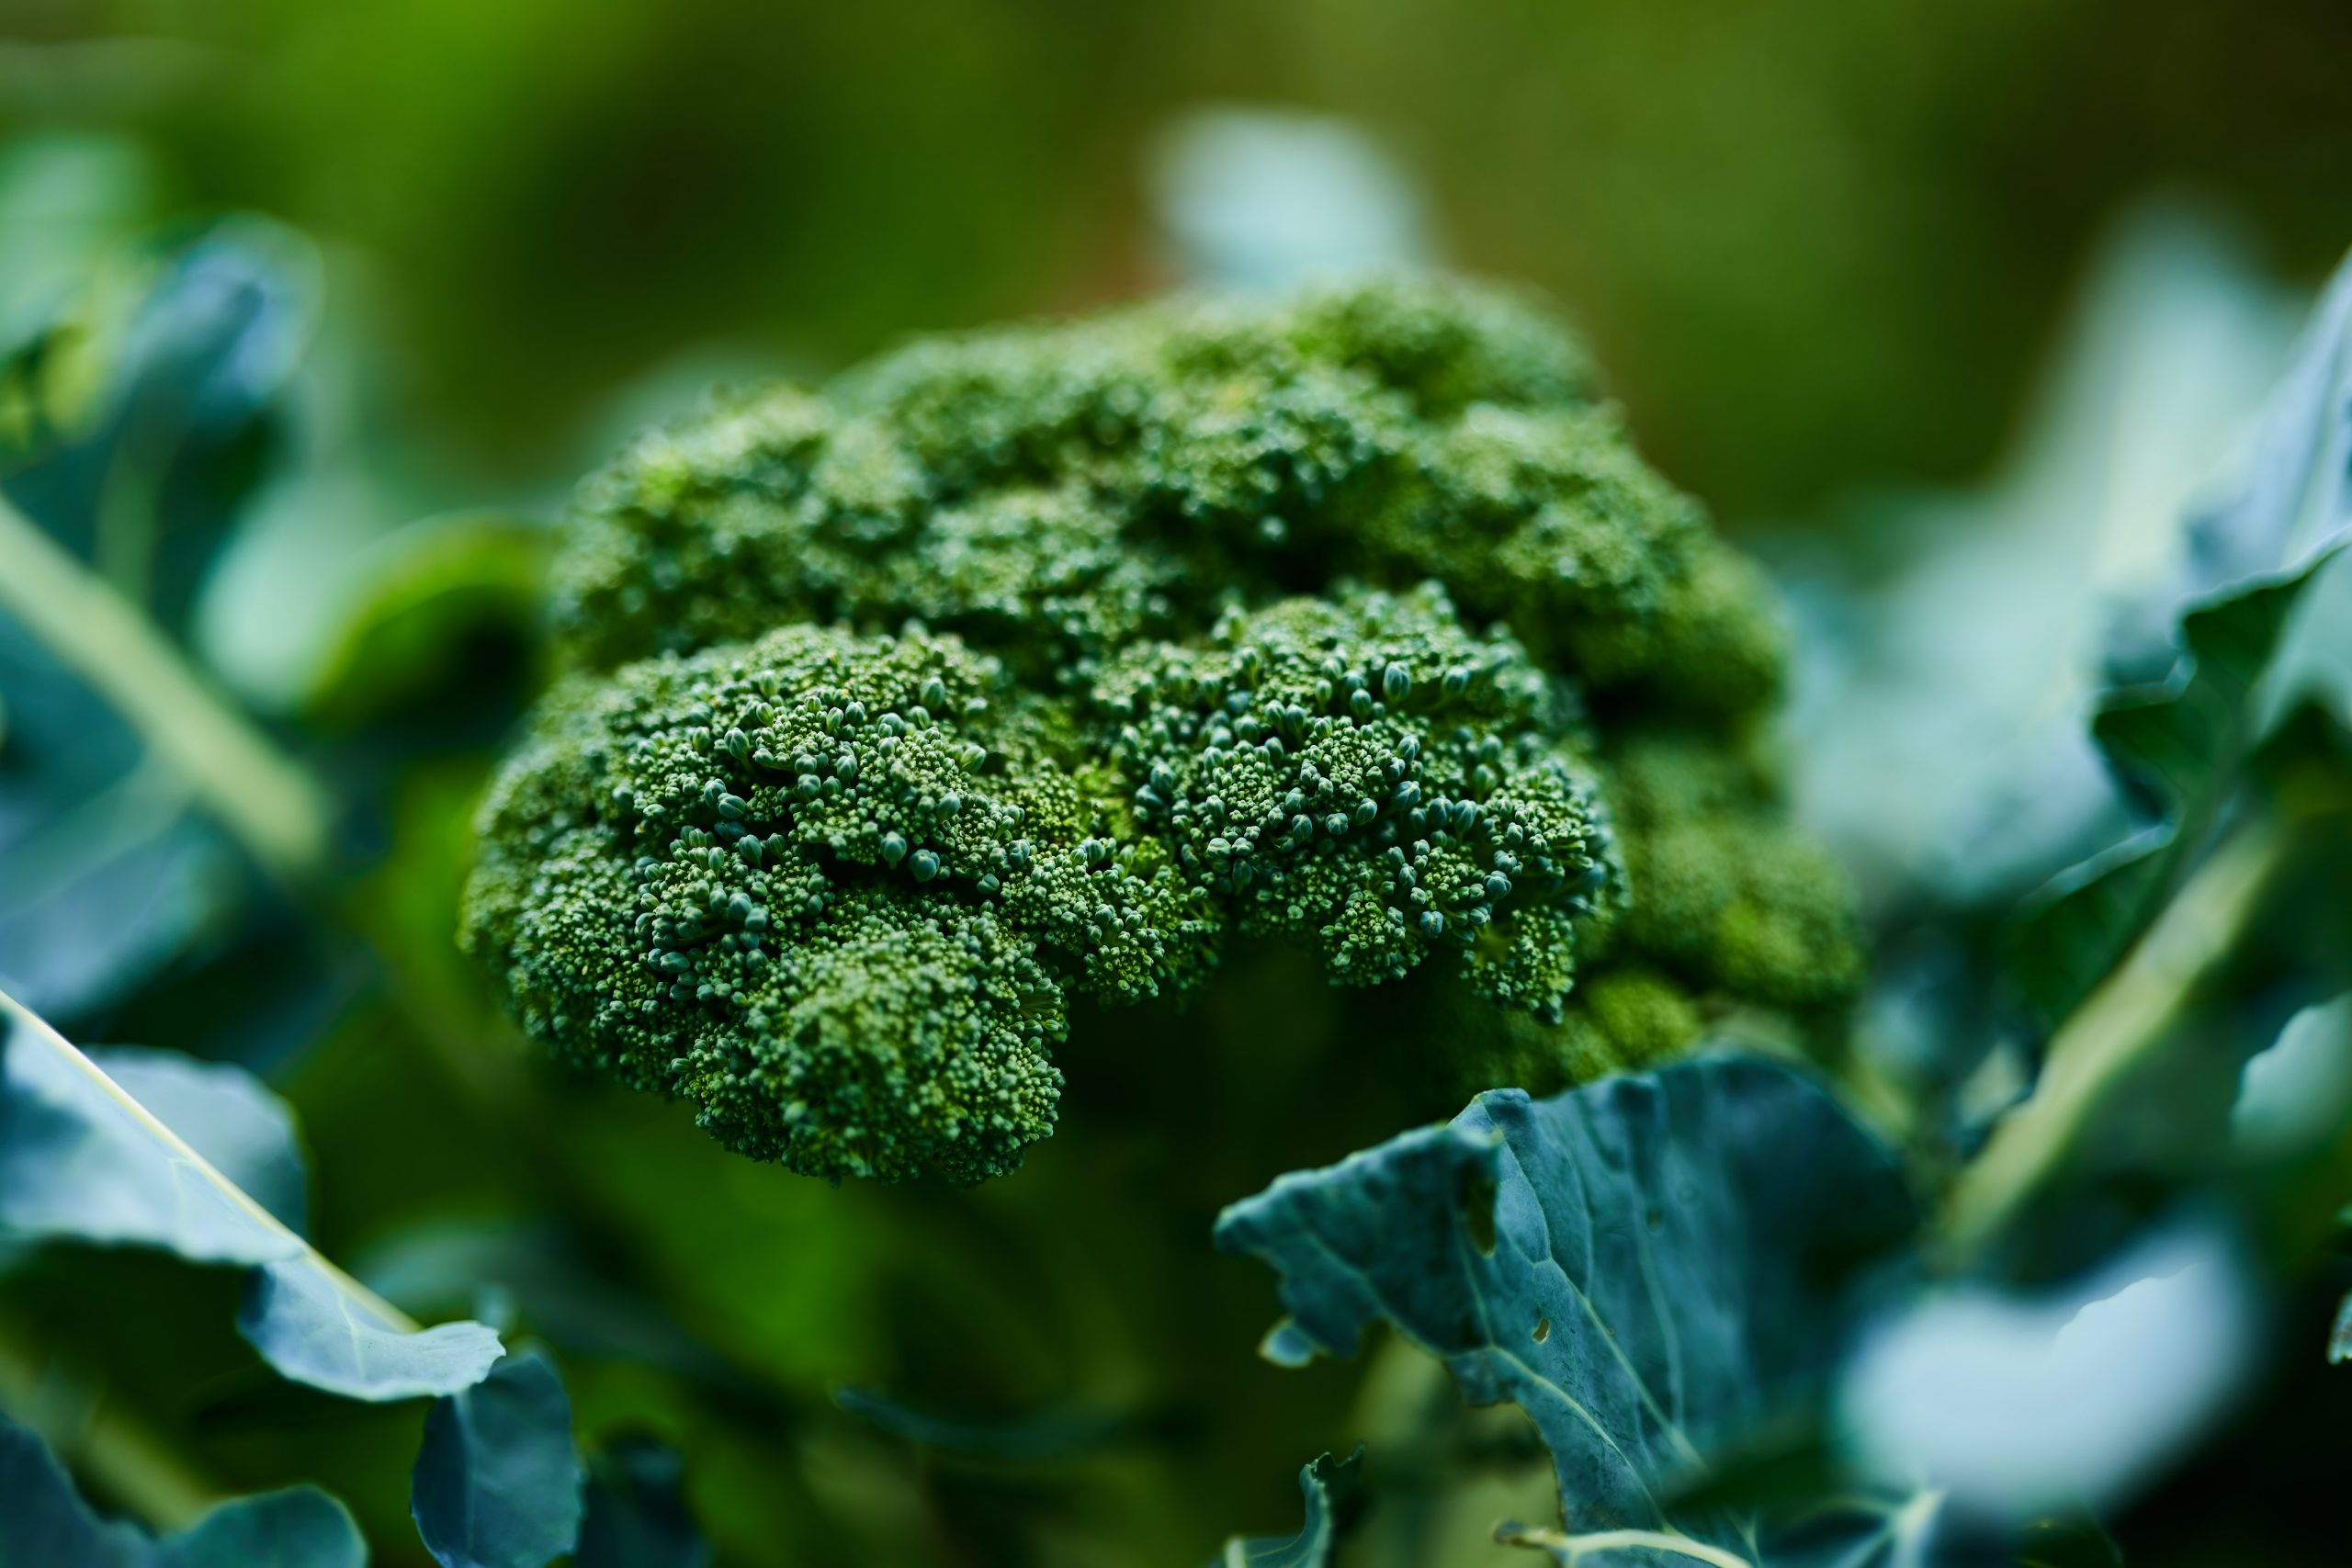 How Long Do Broccoli Side Shoots Take To Grow? And How Big Do They Get?